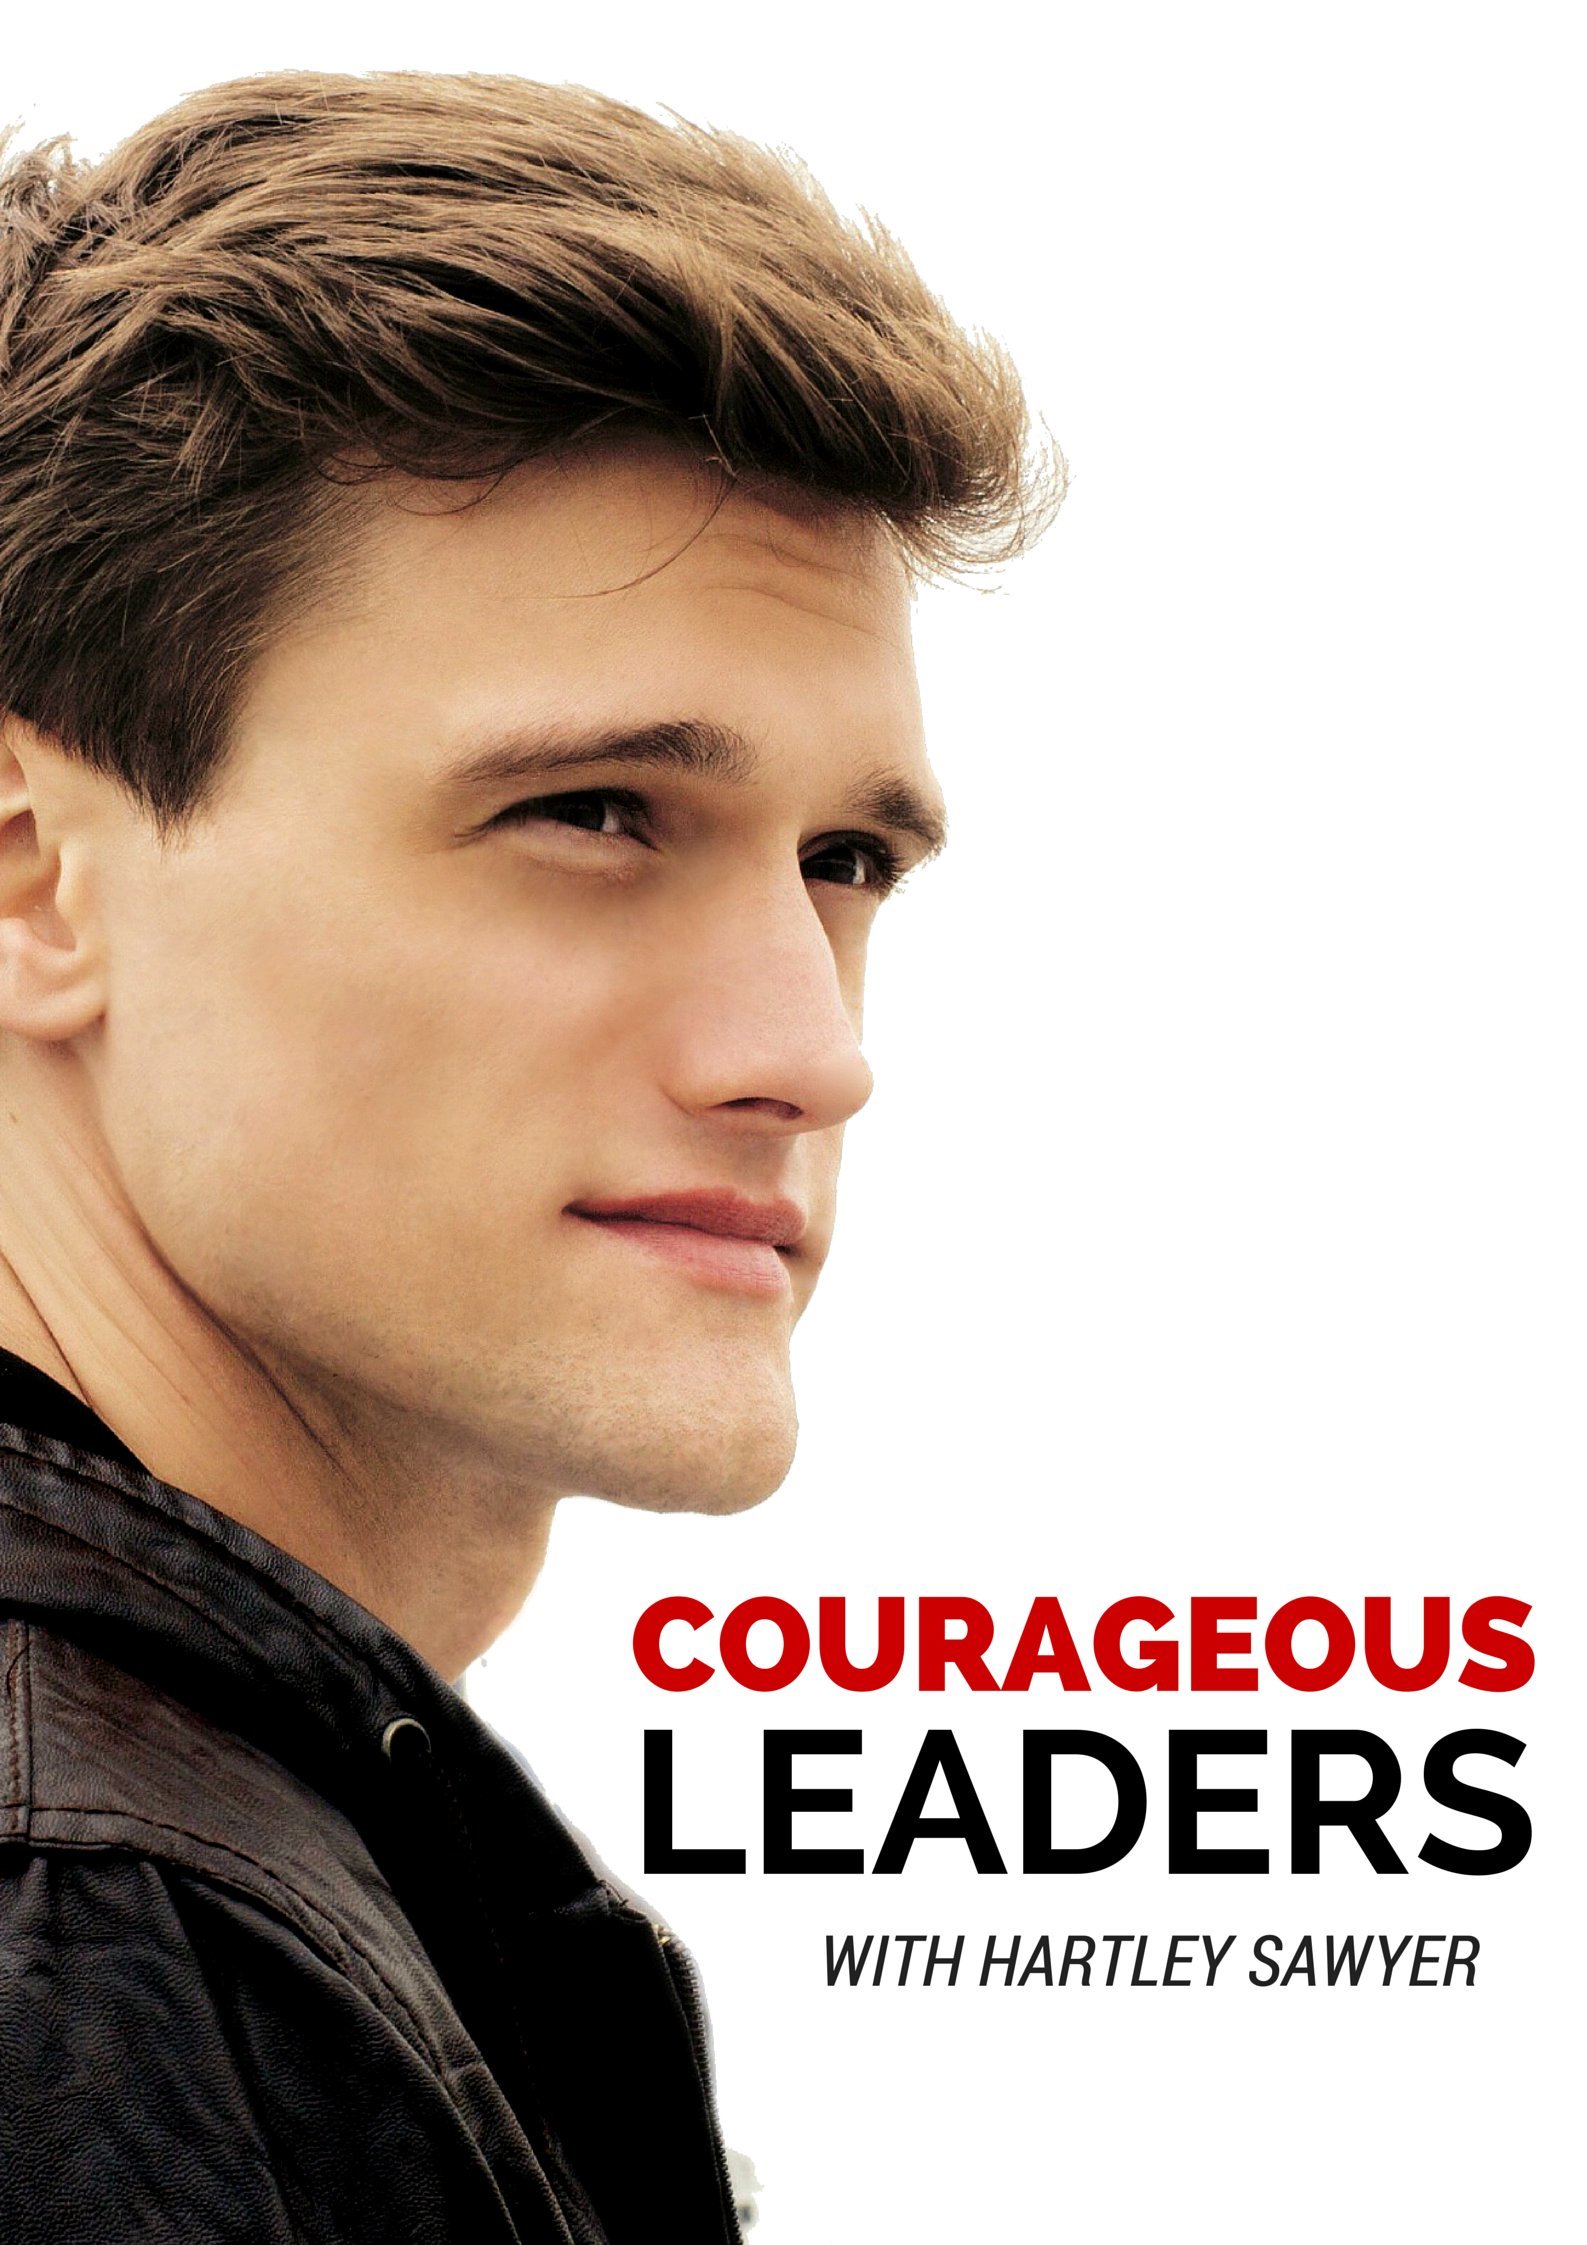 Hartley Sawyer in Courageous Leaders (2015)